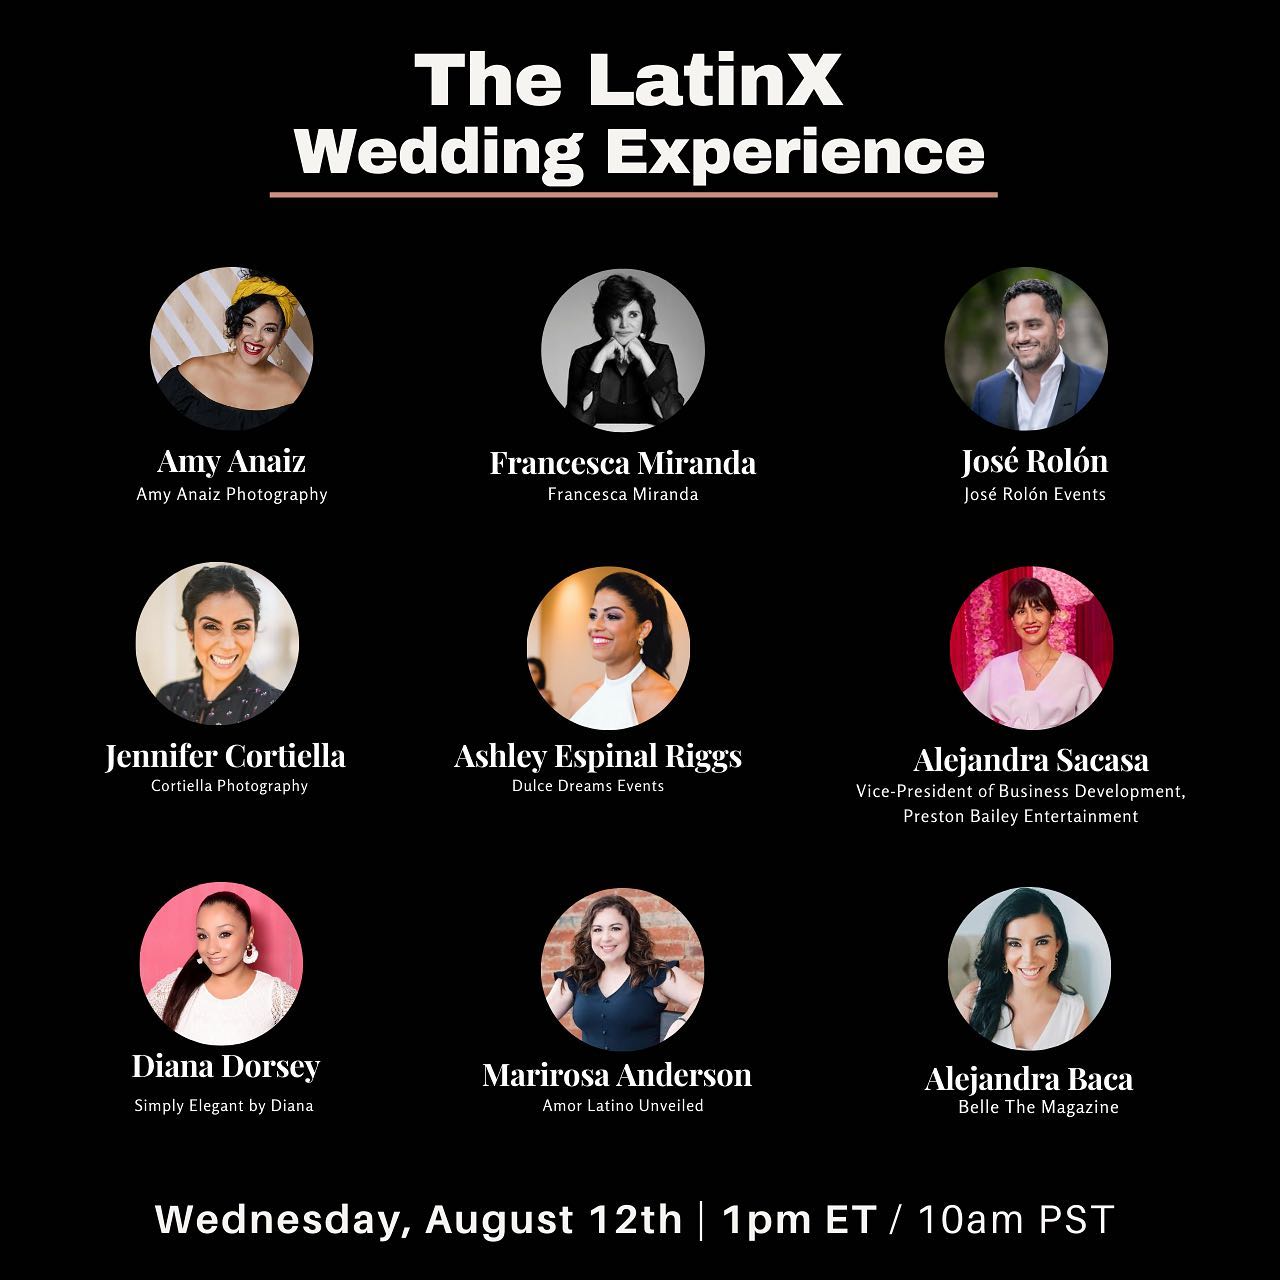 Super excited to be part of this amazing panel tomorrow!  Please join us on Wednesday, August 12th at 1:00pm EST for a candid and important conversation about The LatinX Experience in the wedding & event industry with @amyanaizphoto @francescamiranda_ @alesacasa @joserolonevents @dulcedreamsevents @cortiellaphotography @booksimplyelegant @amorlatinounveiled and @bellethemagazine Register by clicking the link in my stories ????